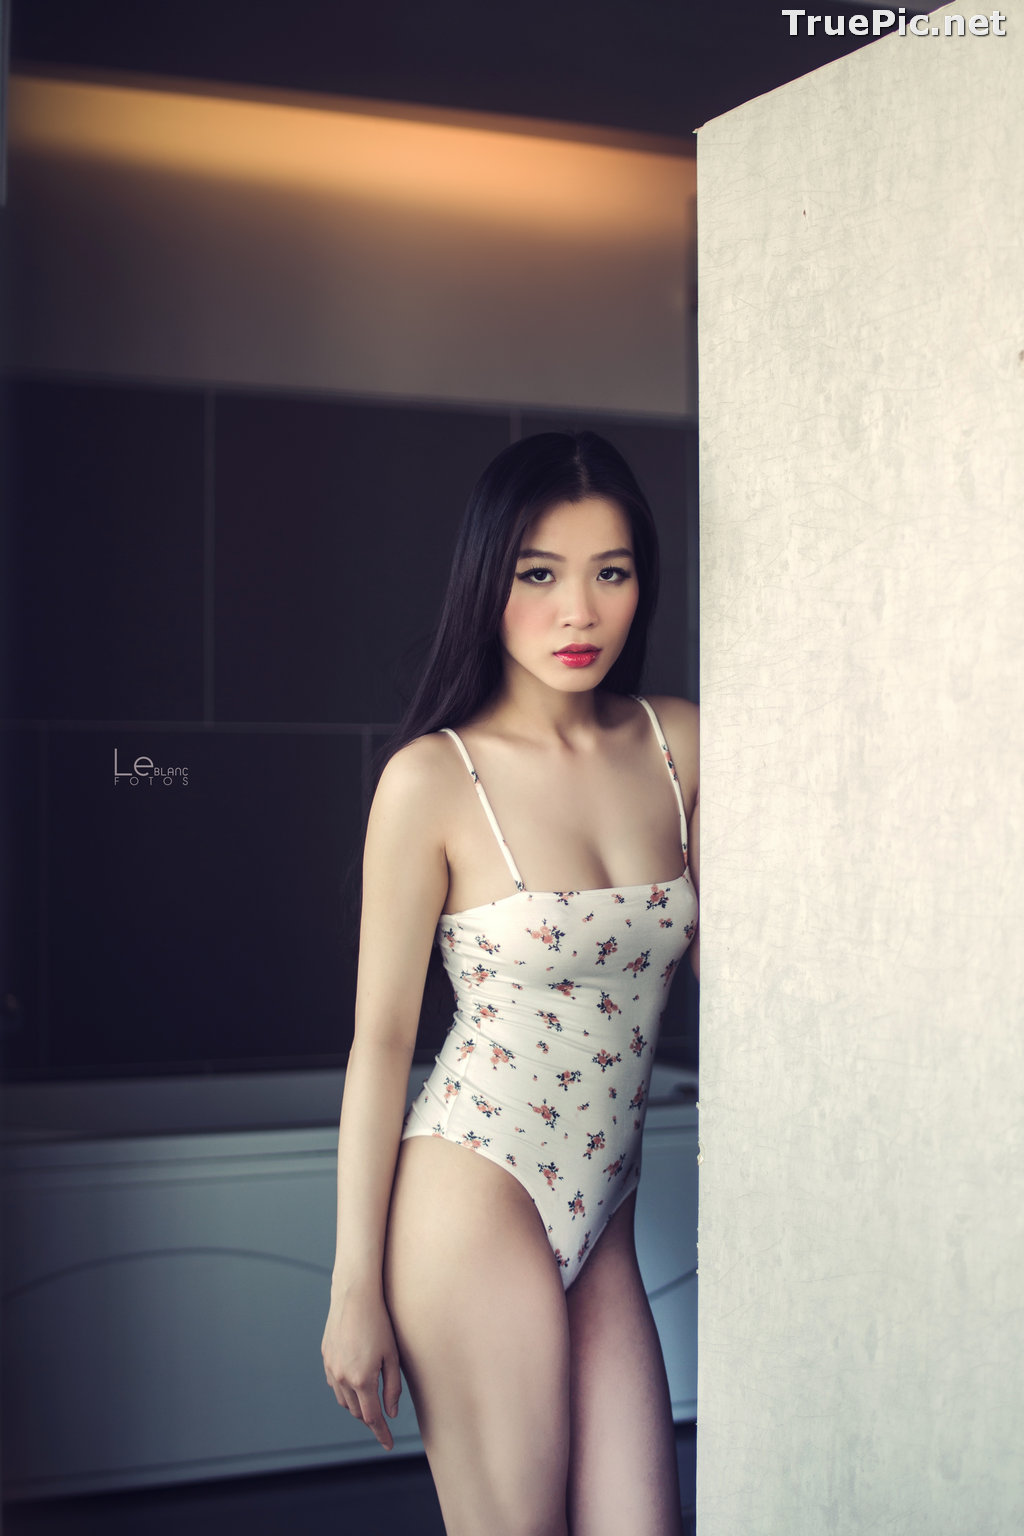 Image Vietnamese Beauties With Lingerie and Bikini – Photo by Le Blanc Studio #11 - TruePic.net - Picture-95